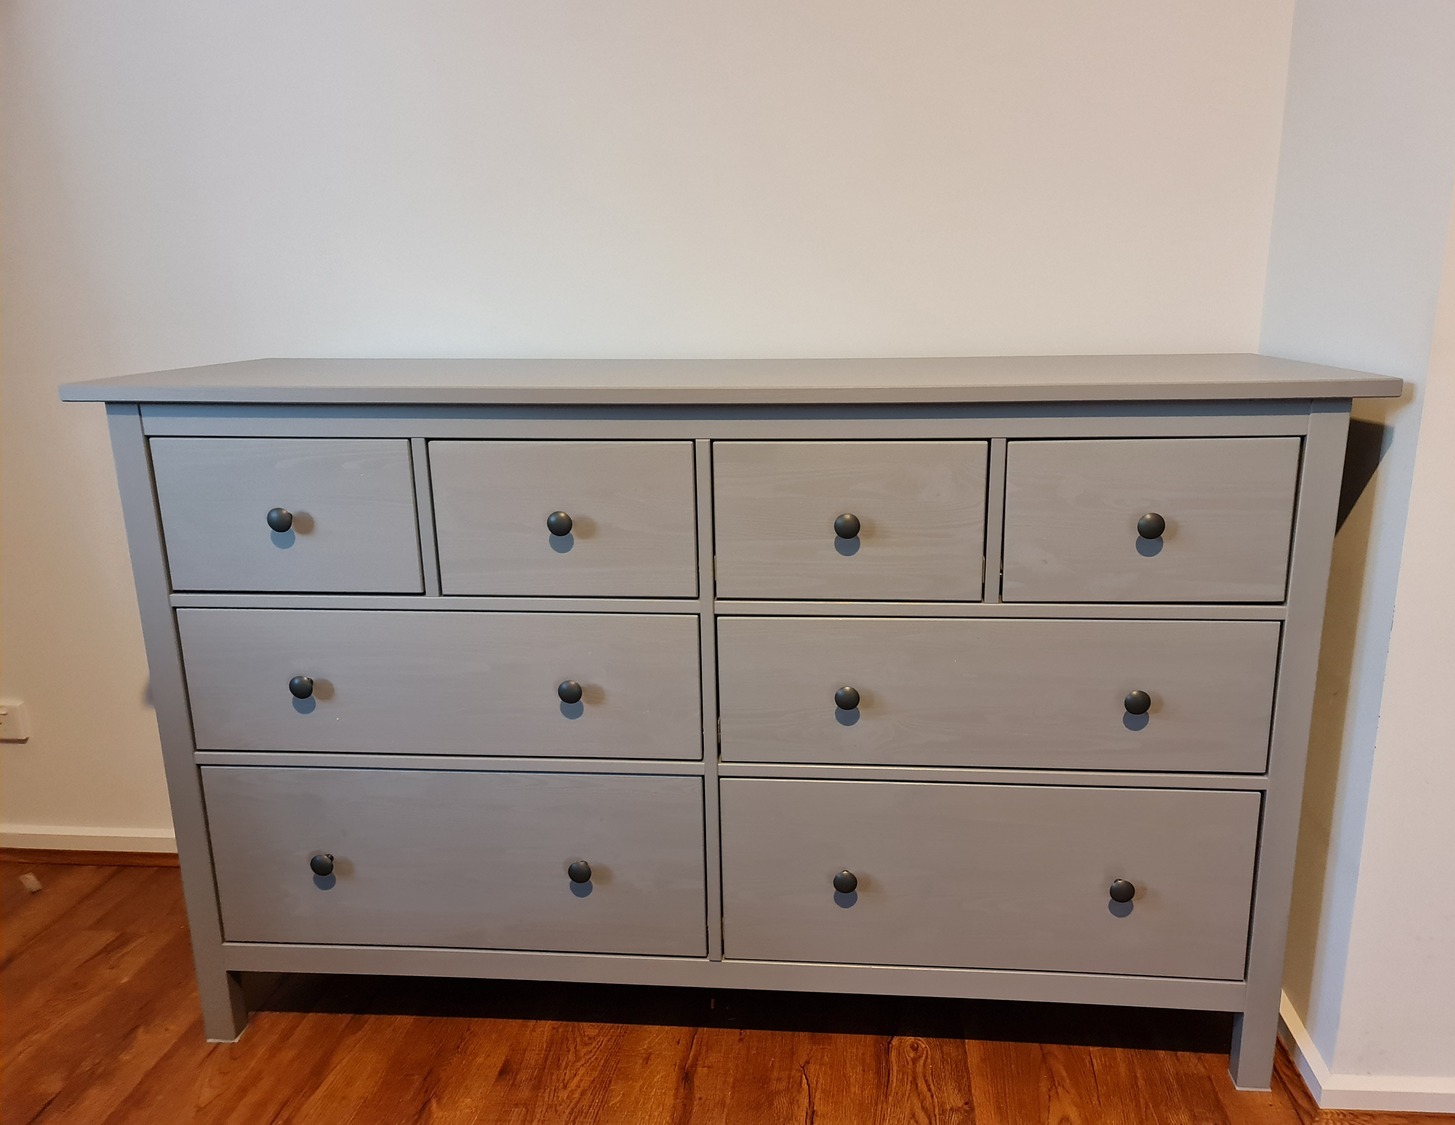 <span style="font-weight: bold;">Bedroom storage&nbsp;Assembly</span>&nbsp;